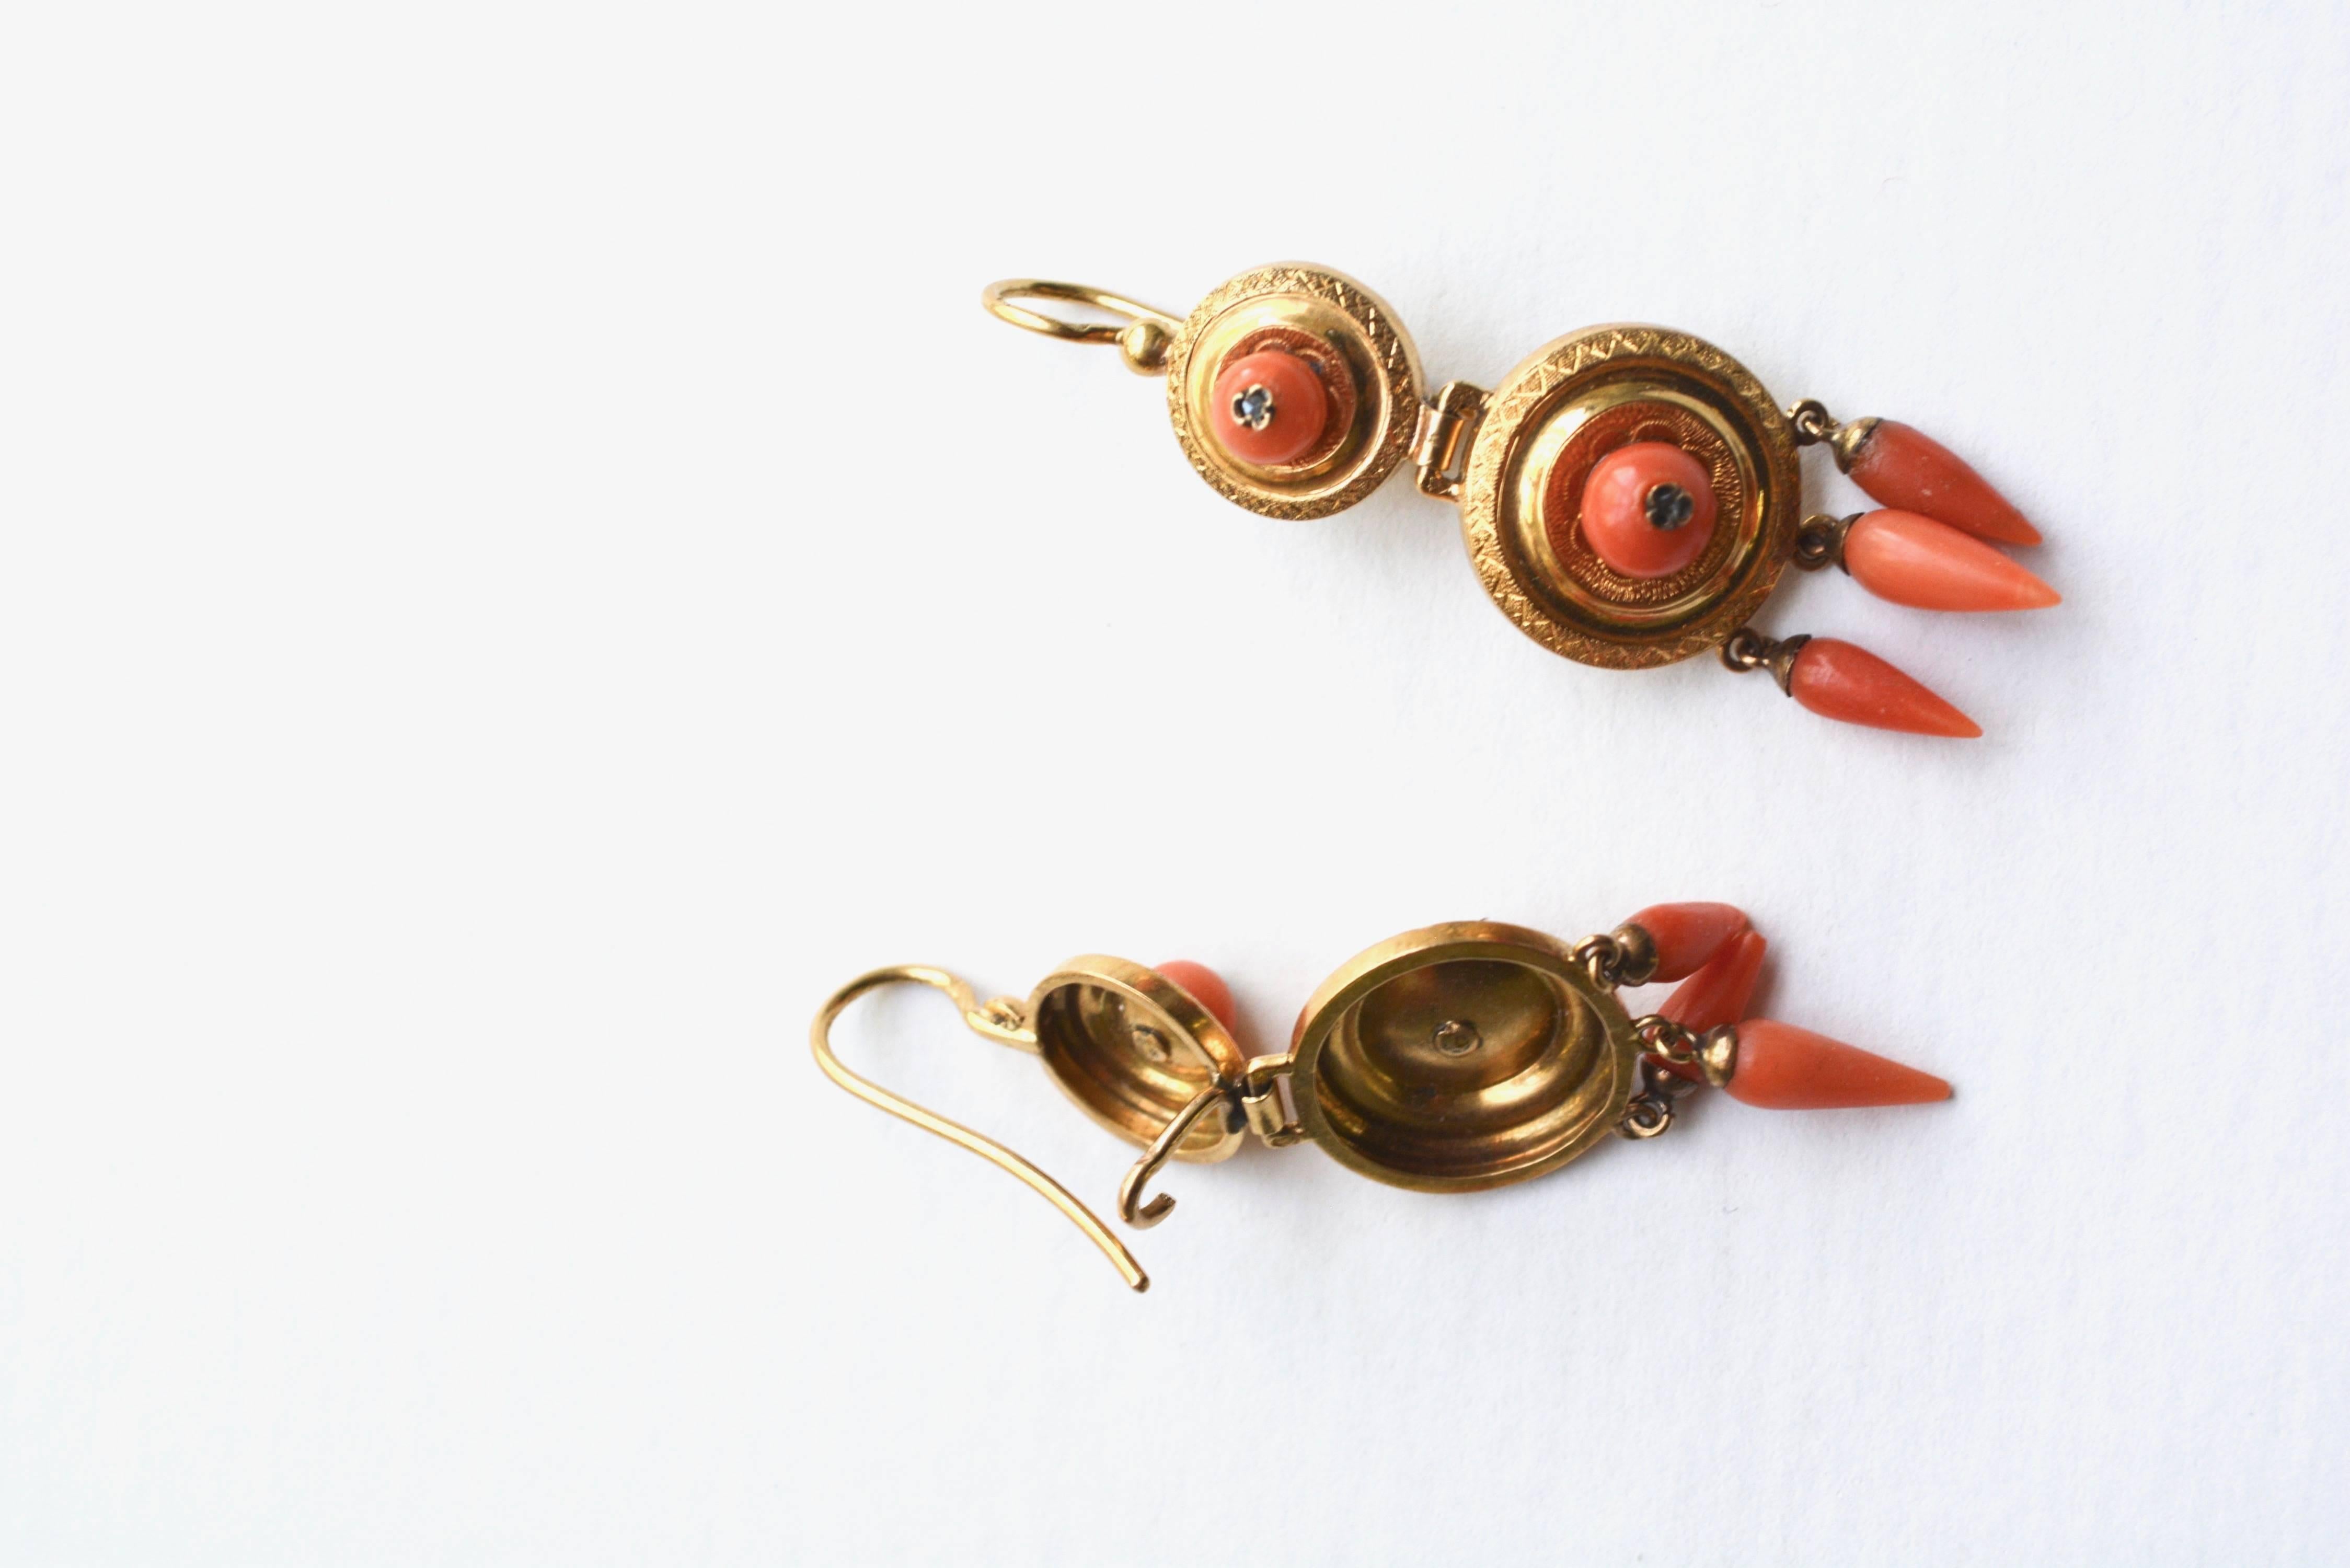 Gold and coral Victorian hook earrings with European hallmarks, illegible mark which appears to be either a lion or crab. Tiny diamond accents. Mild wear to one coral tip with has been chipped. Could be smoothed, but not noticeable on the ear.